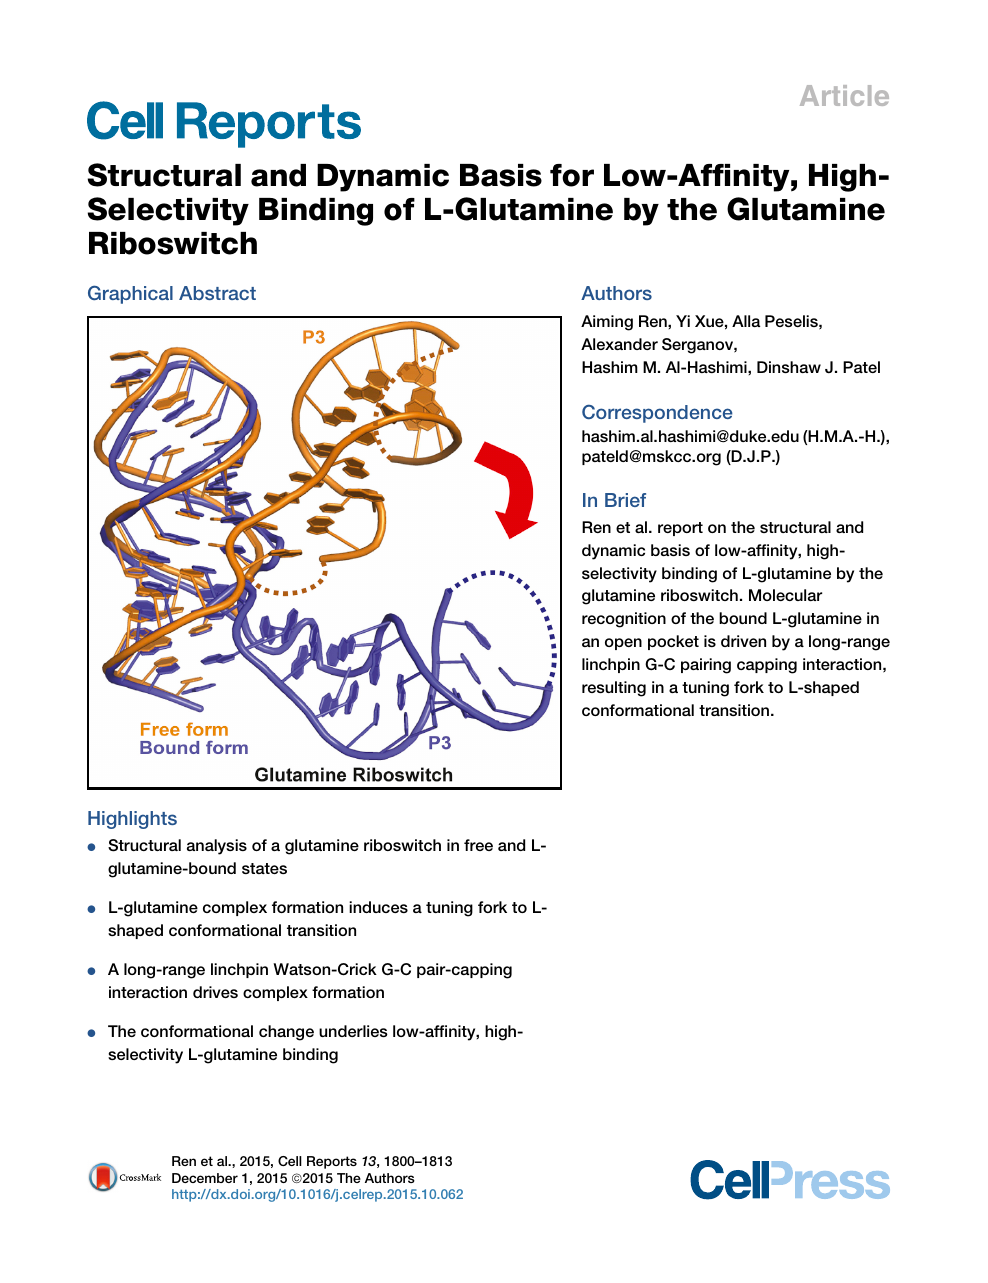 Structural And Dynamic Basis For Low Affinity High Selectivity Binding Of L Glutamine By The Glutamine Riboswitch Topic Of Research Paper In Biological Sciences Download Scholarly Article Pdf And Read For Free On Cyberleninka